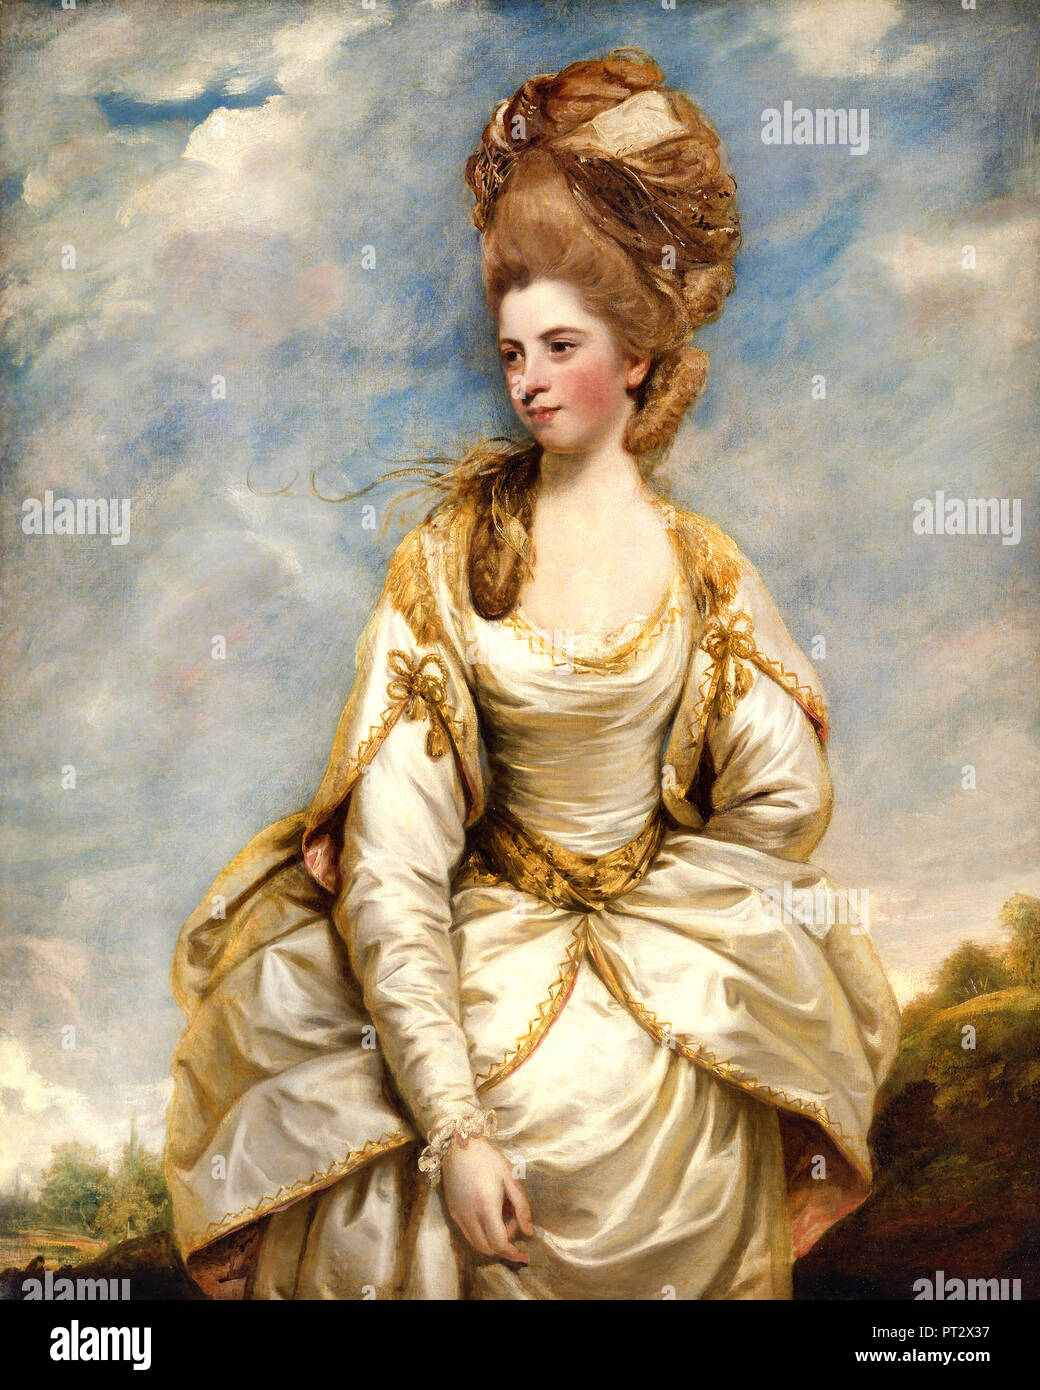 Joshua Reynolds, Sarah Campbell, Circa 1777-1778 Oil on canvas, Yale Center for British Art, New Haven, USA. Stock Photo